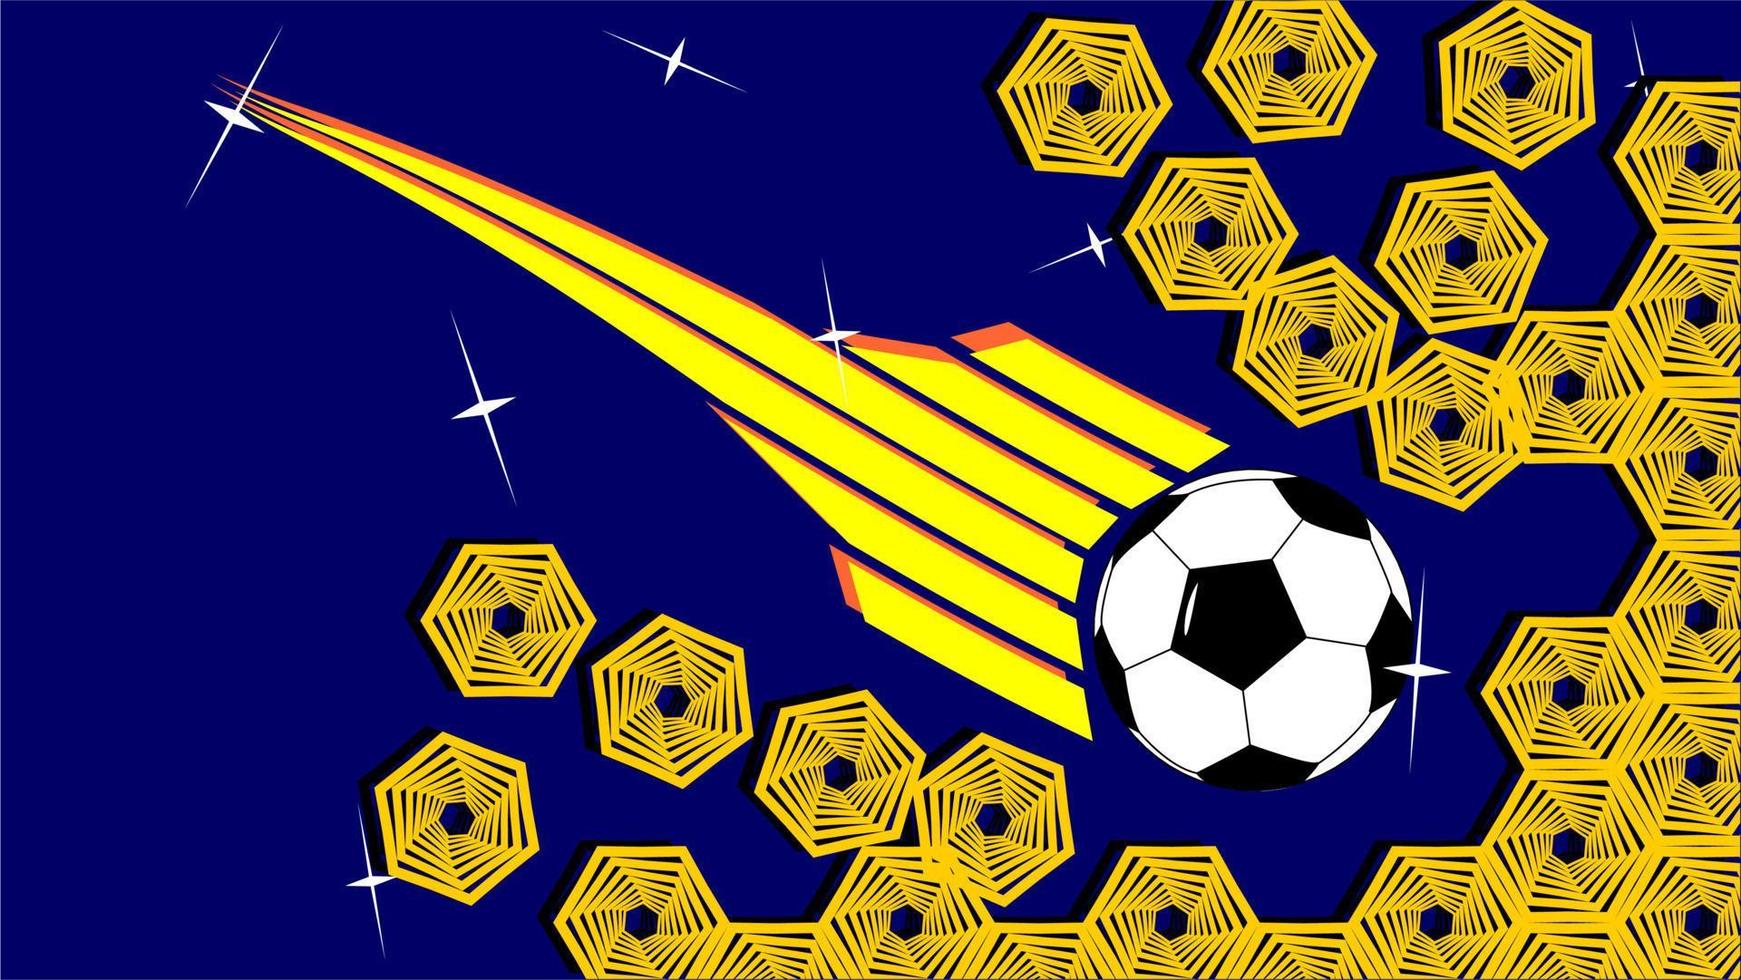 Abstract blue yellow football background vector illustration